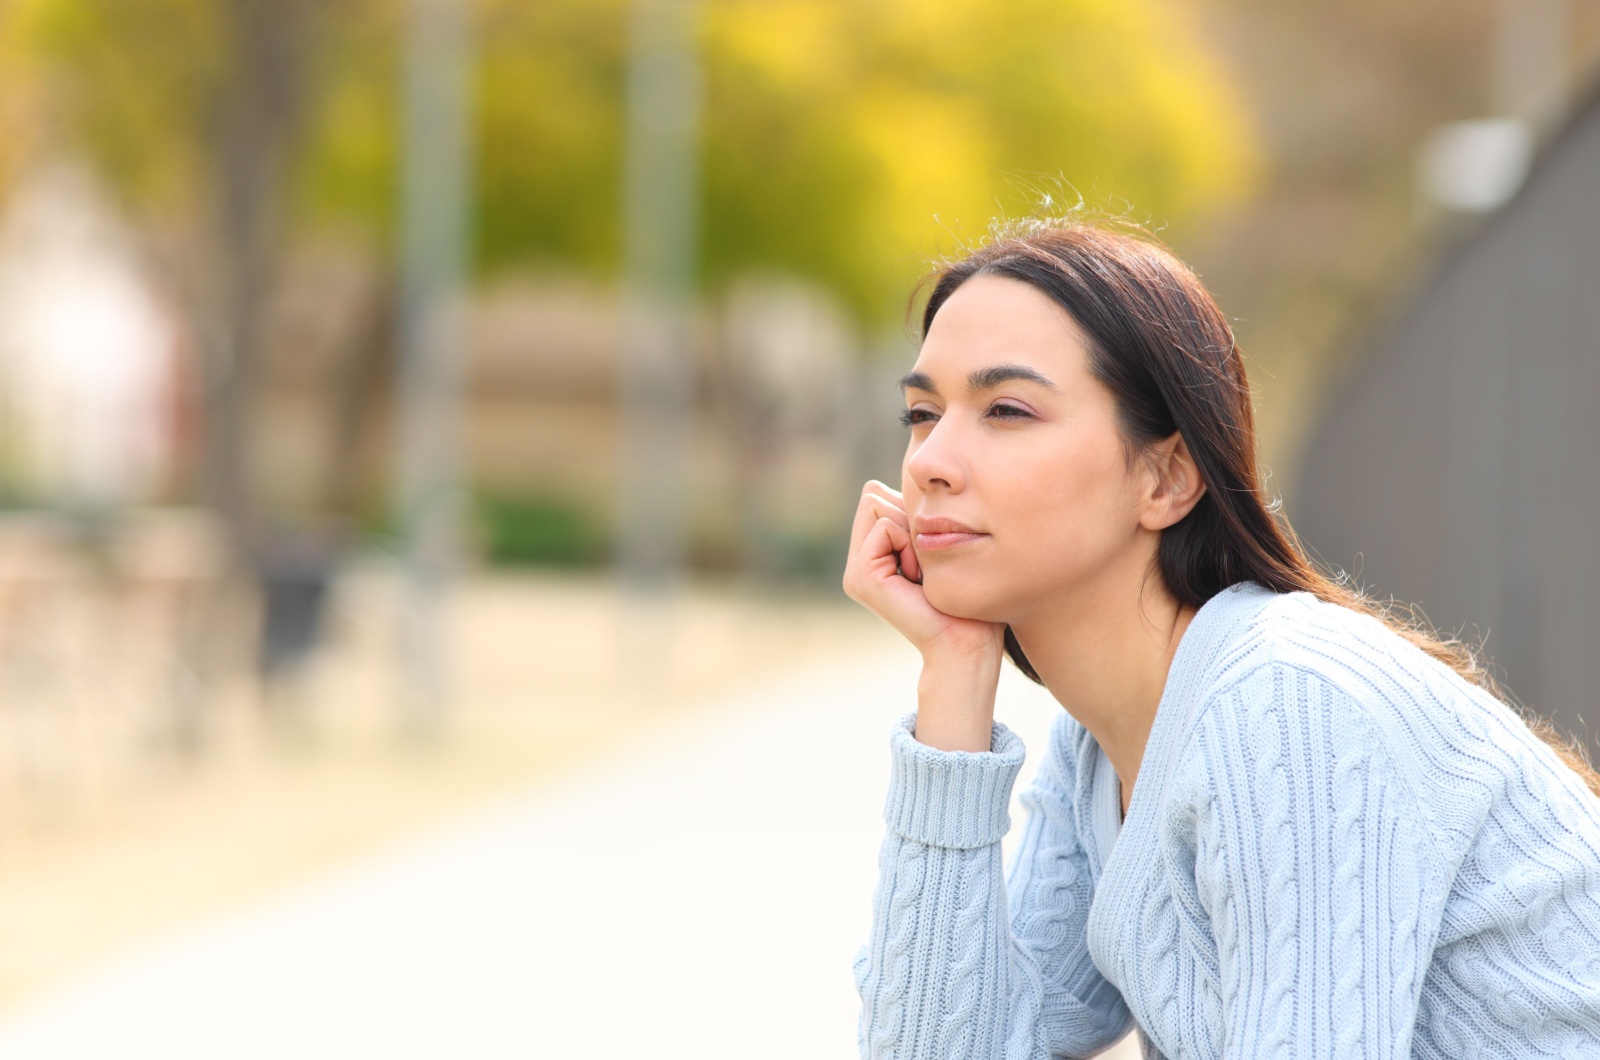 woman looking into distance thinking